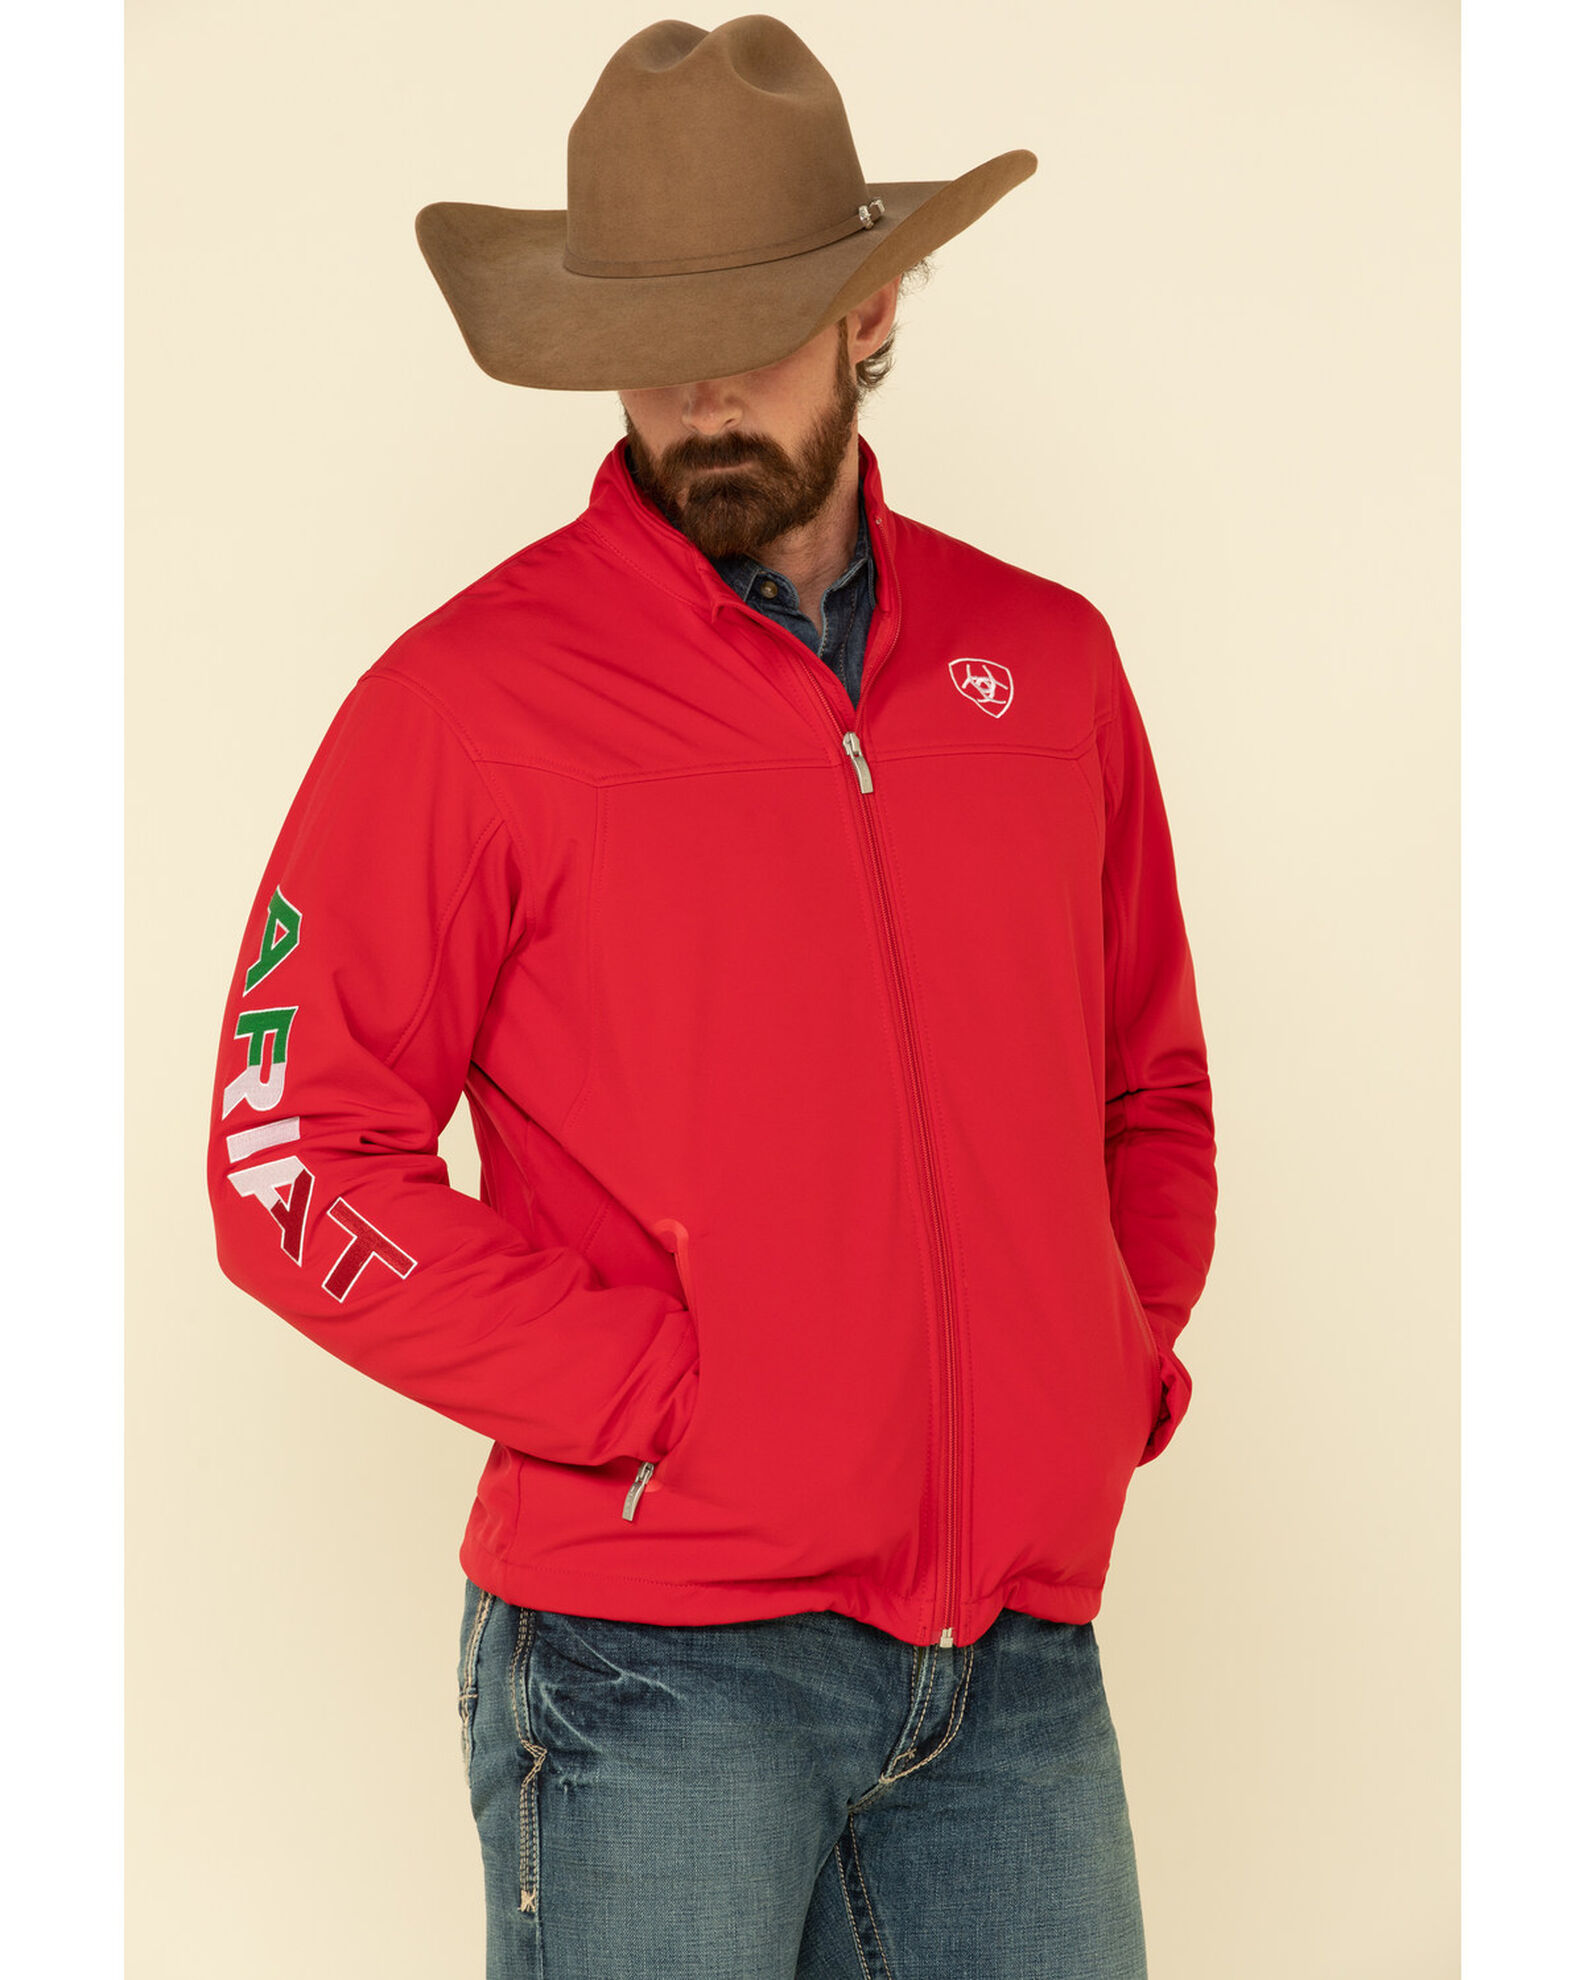 Ariat Men's Red Mexico New Team Softshell Jacket